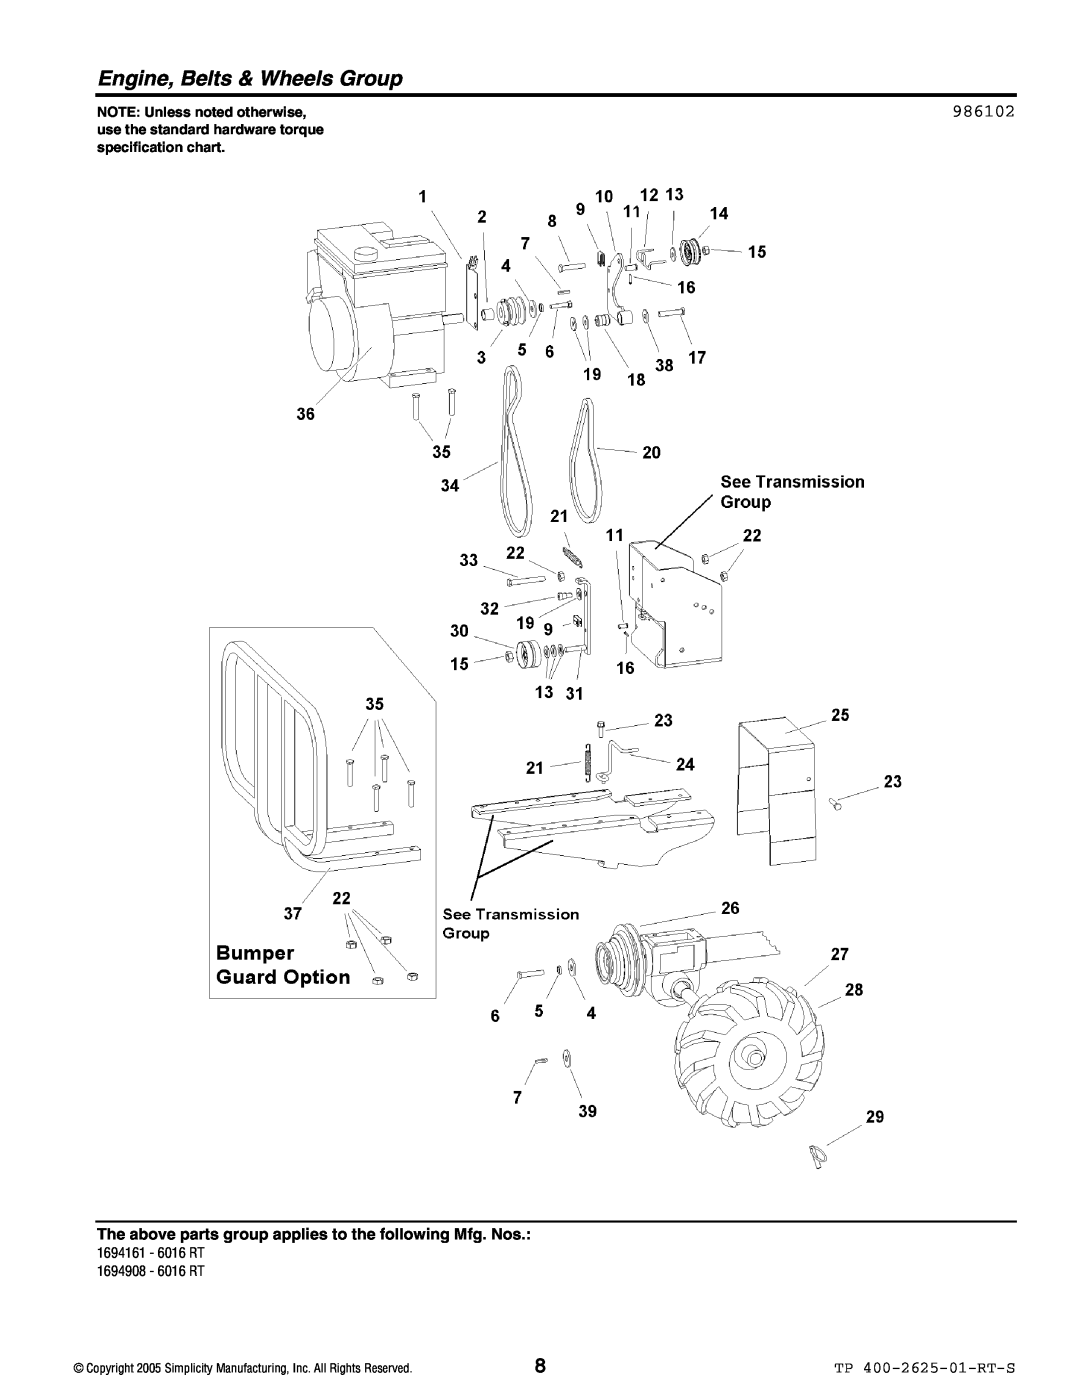 Simplicity 6HP Series, 1730319 manual Engine, Belts & Wheels Group, 986102, TP 400-2625-01-RT-S, NOTE Unless noted otherwise 